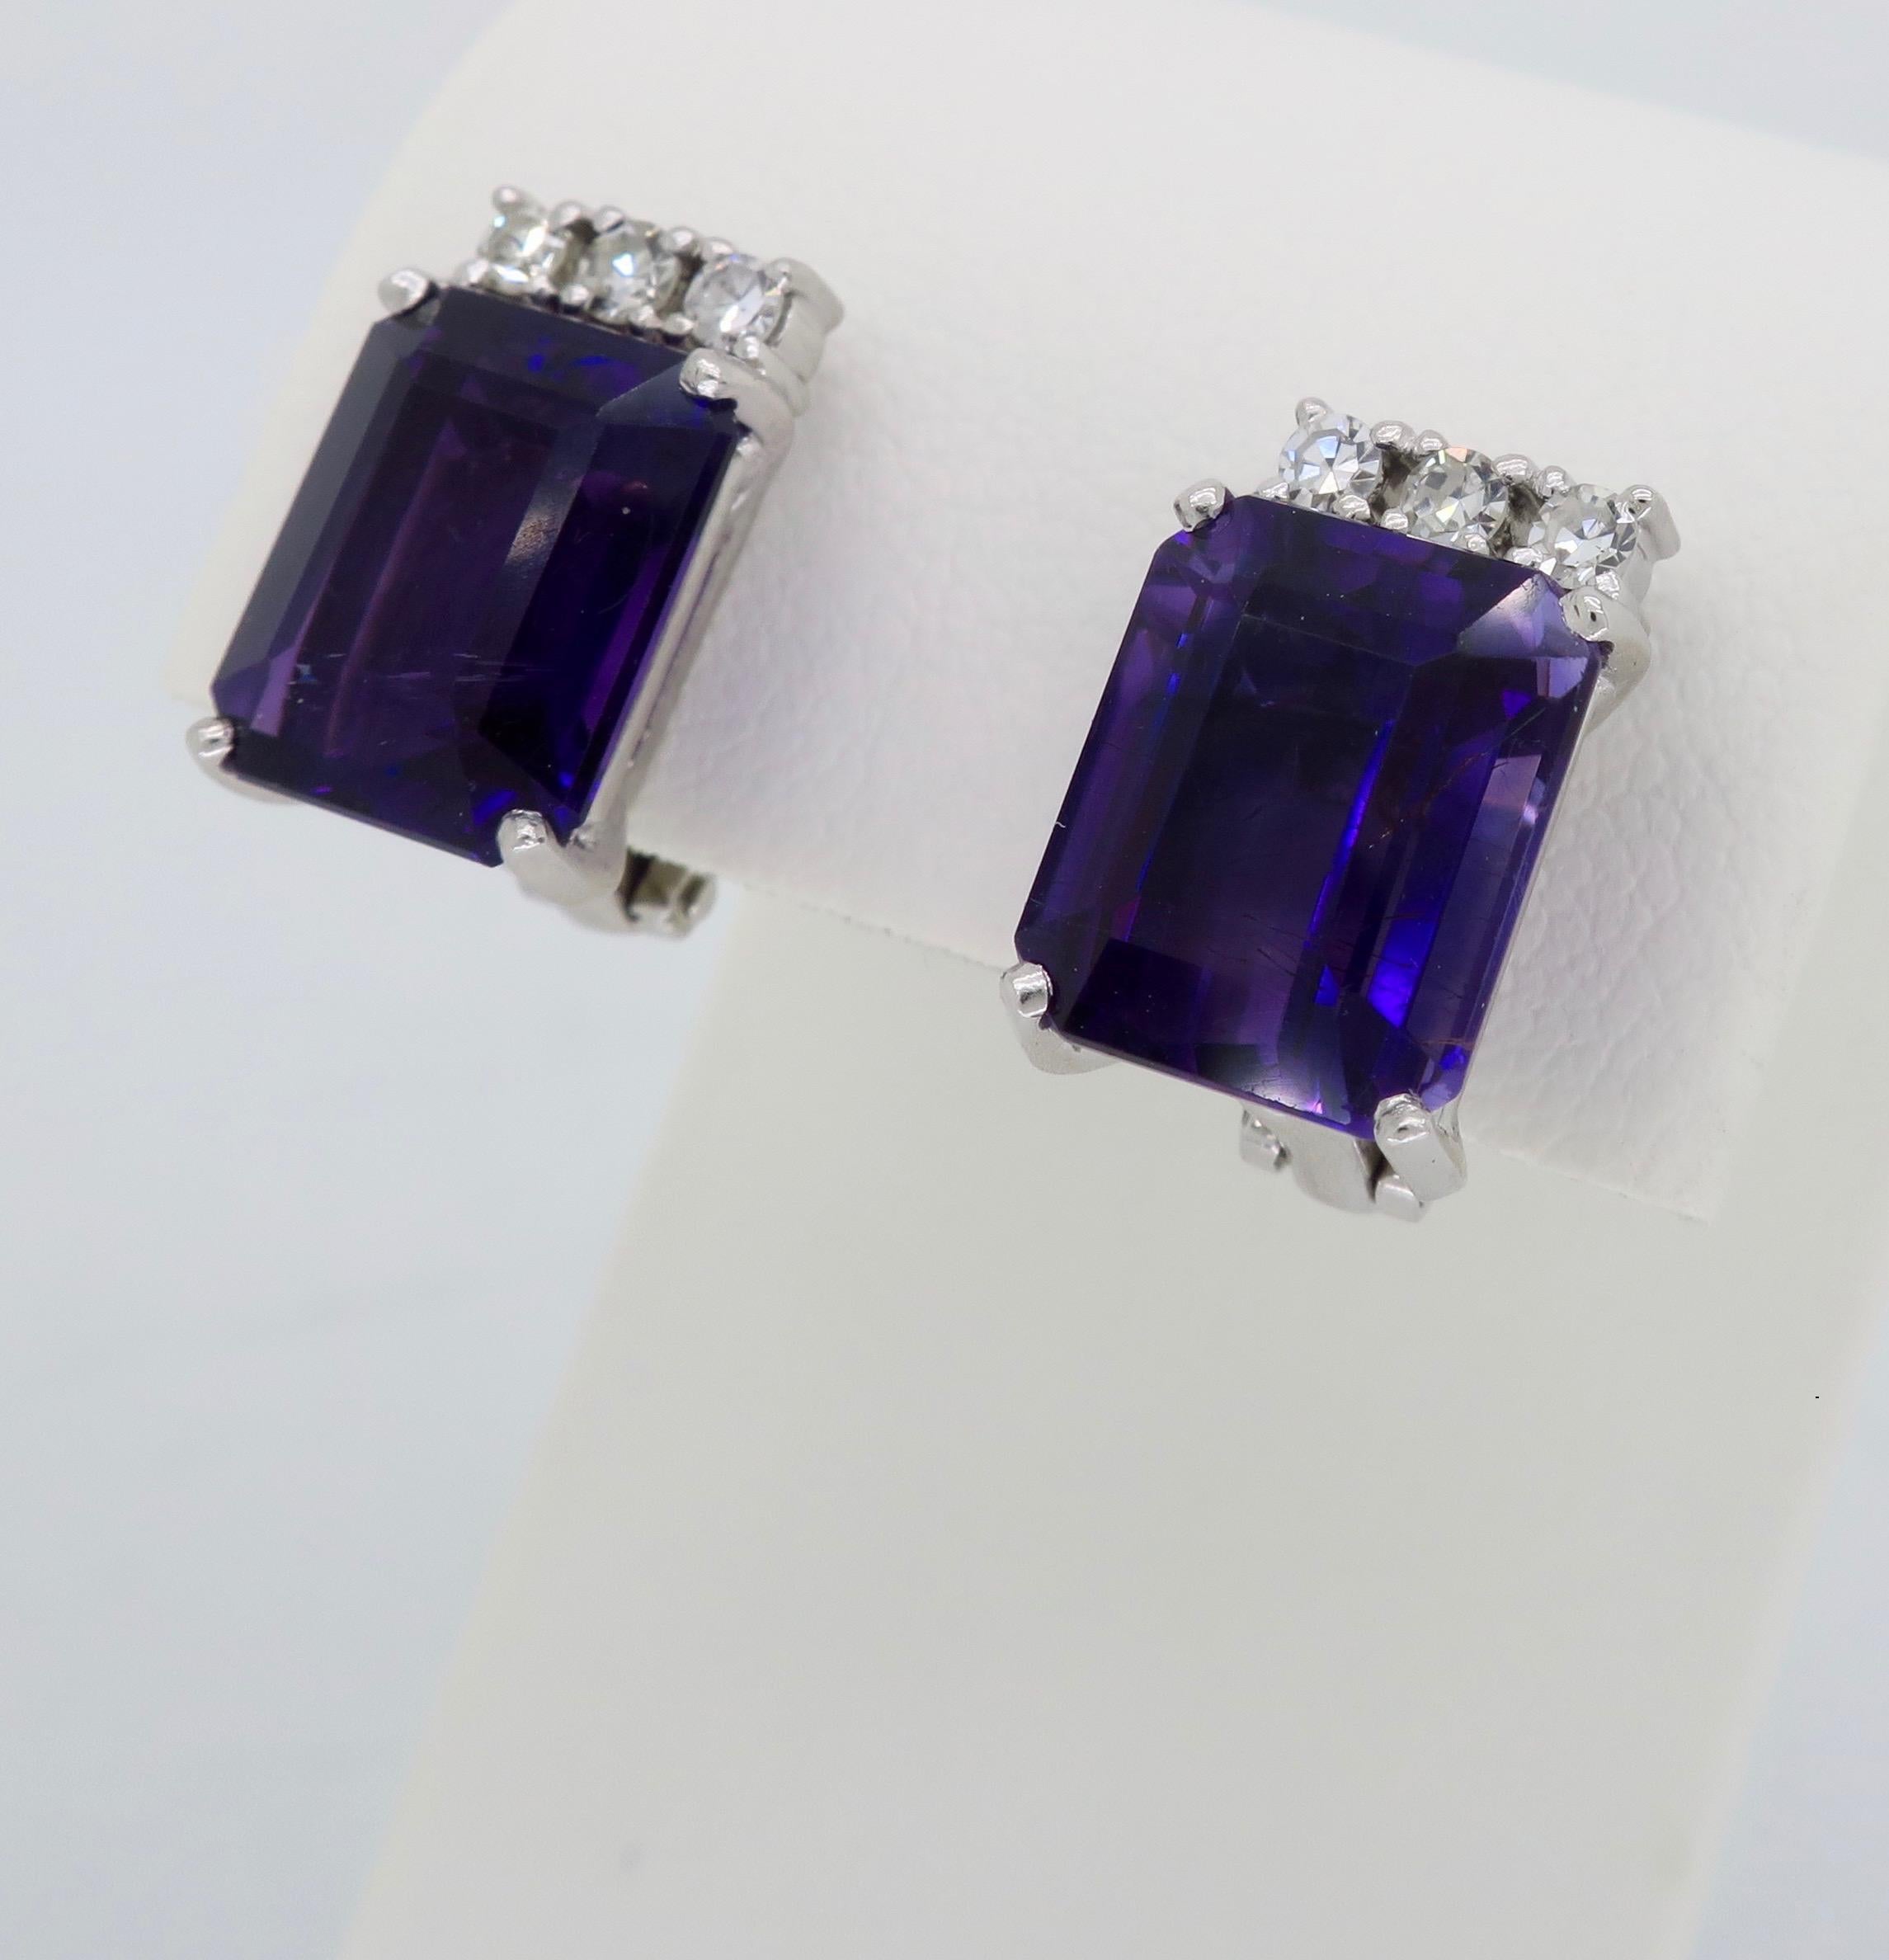 Vintage Amethyst and Diamond clip on style earrings.

Gemstone: Amethyst & Diamond
Gemstone Carat Weight: Two Approximately 11x9mm Amethyst 
Diamond Carat Weight:  Approximately .21CTW
Diamond Cut: Single Cut
Color: Average G-I
Clarity: Average